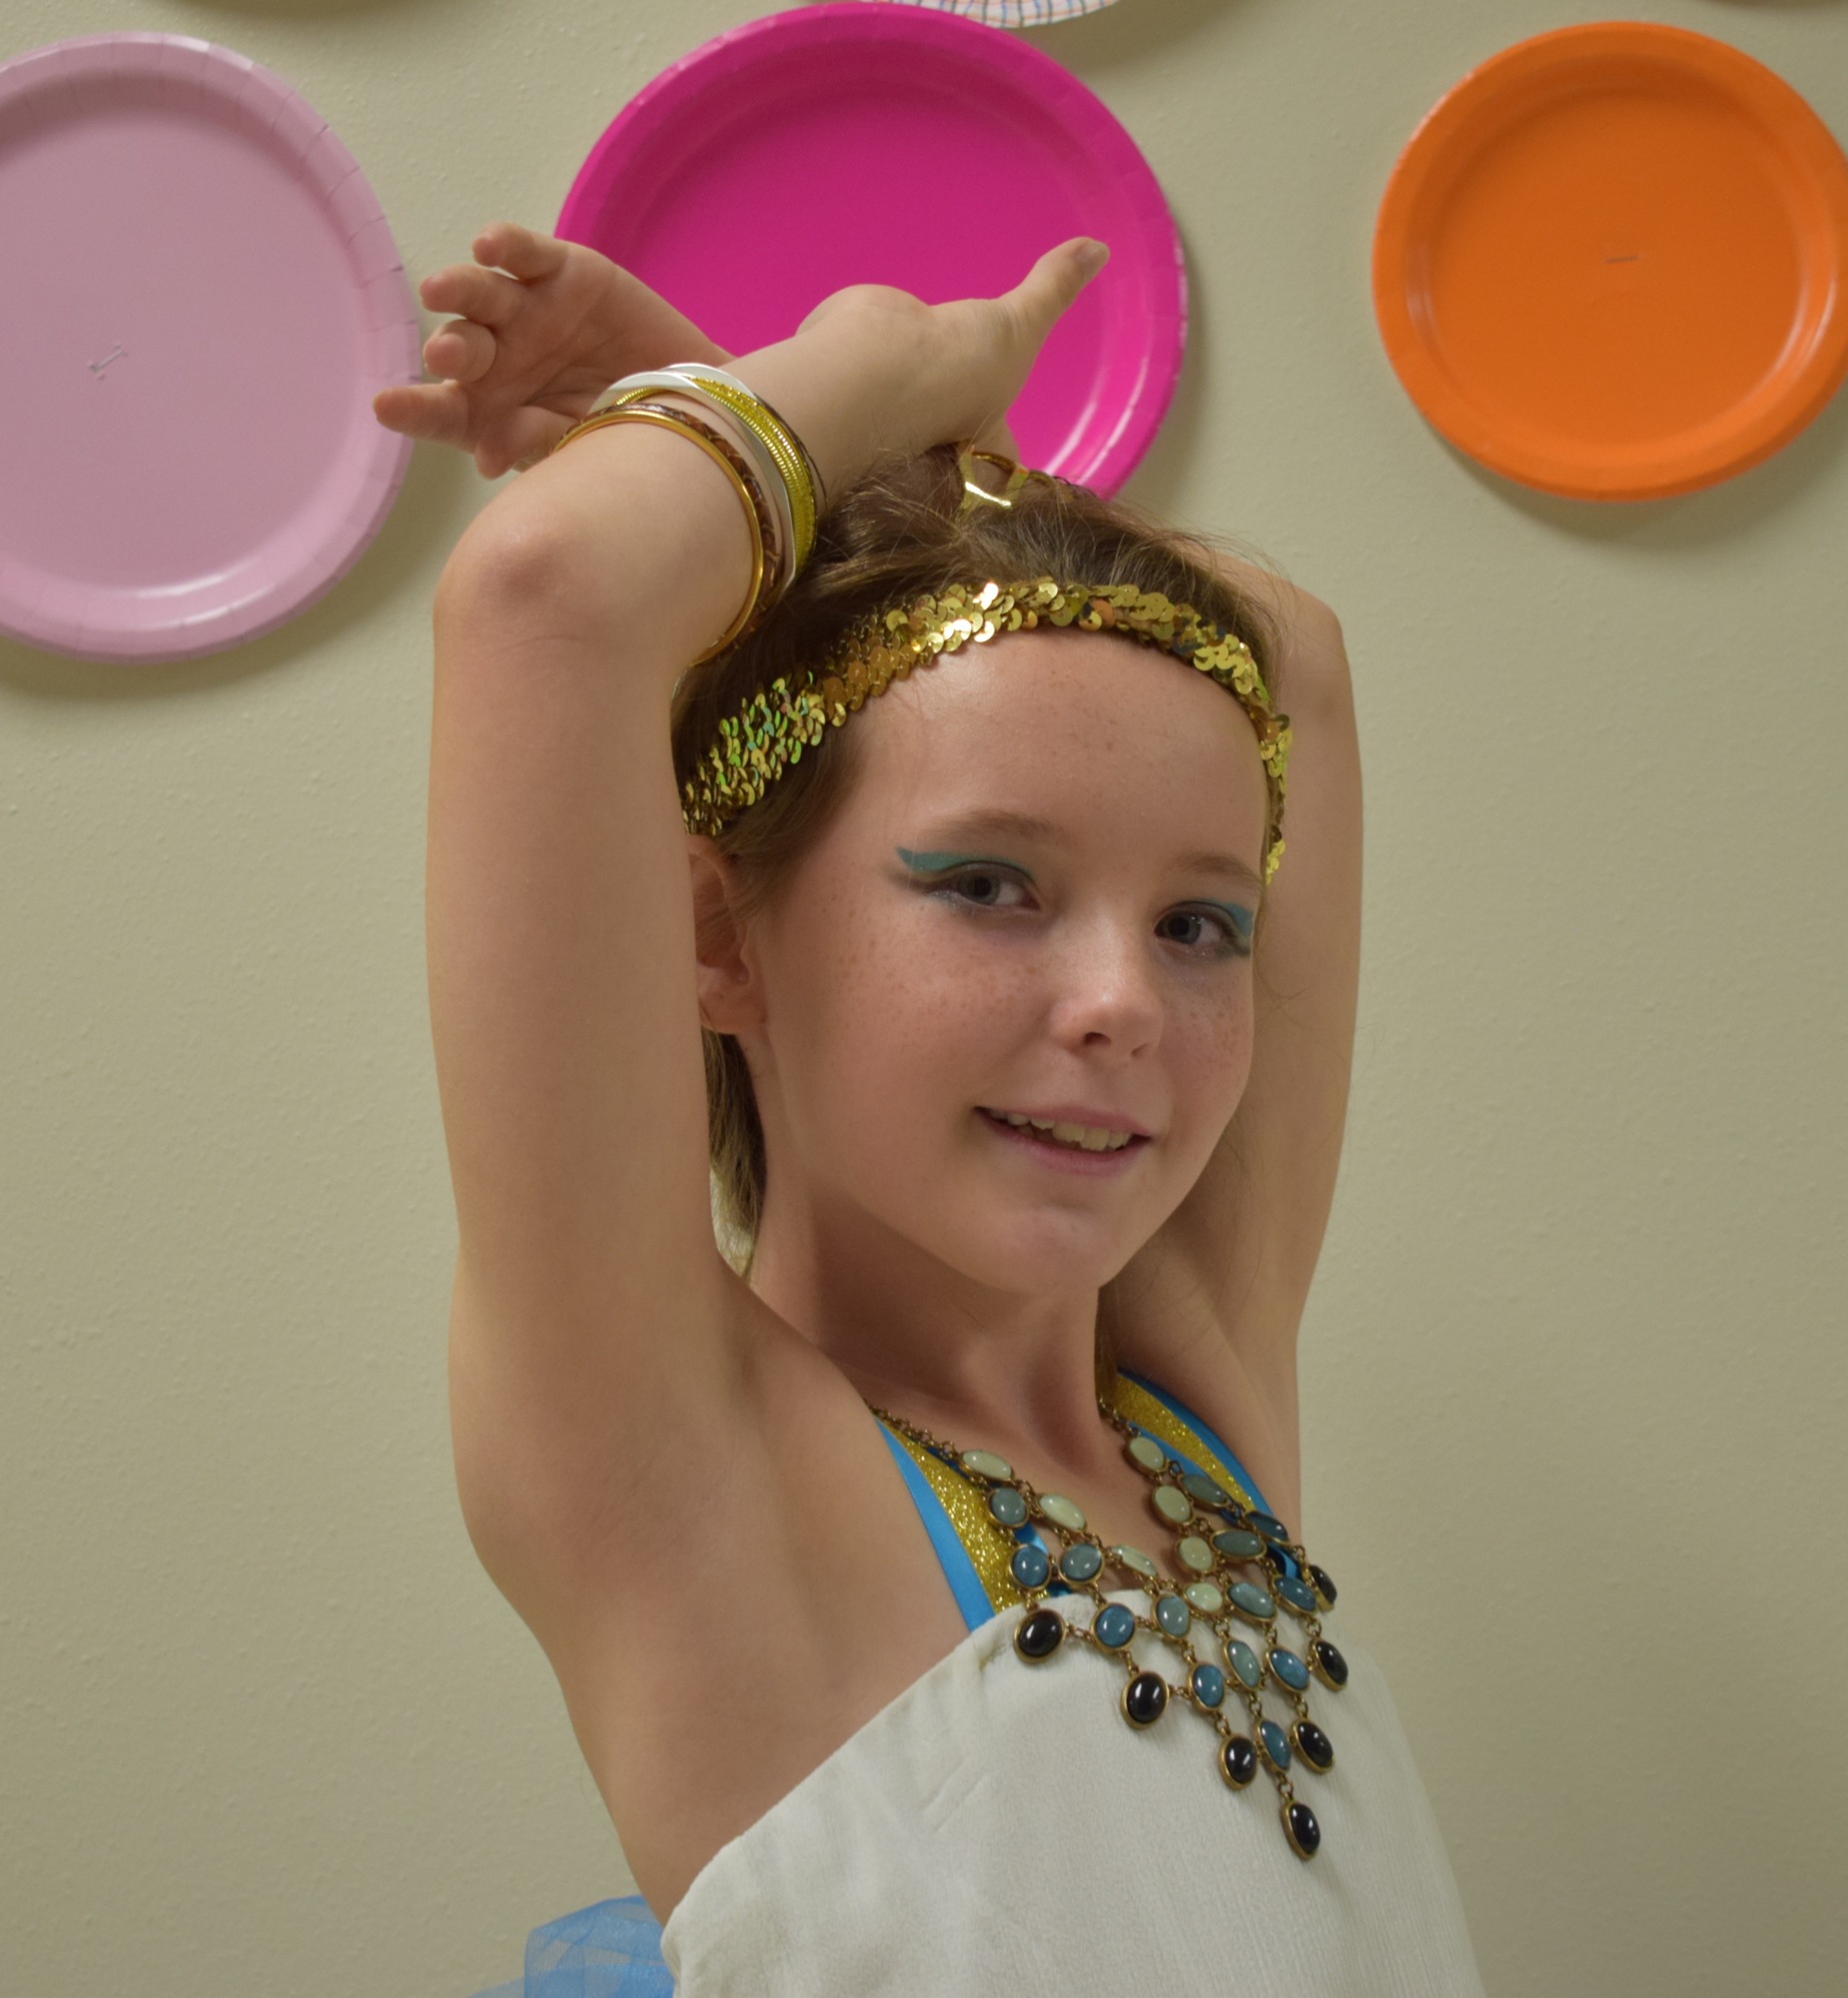 Natalie Brown enjoyed creating her Cleopatra outfit with her mom. The two founds items at Goodwill and sewed the outfit together.